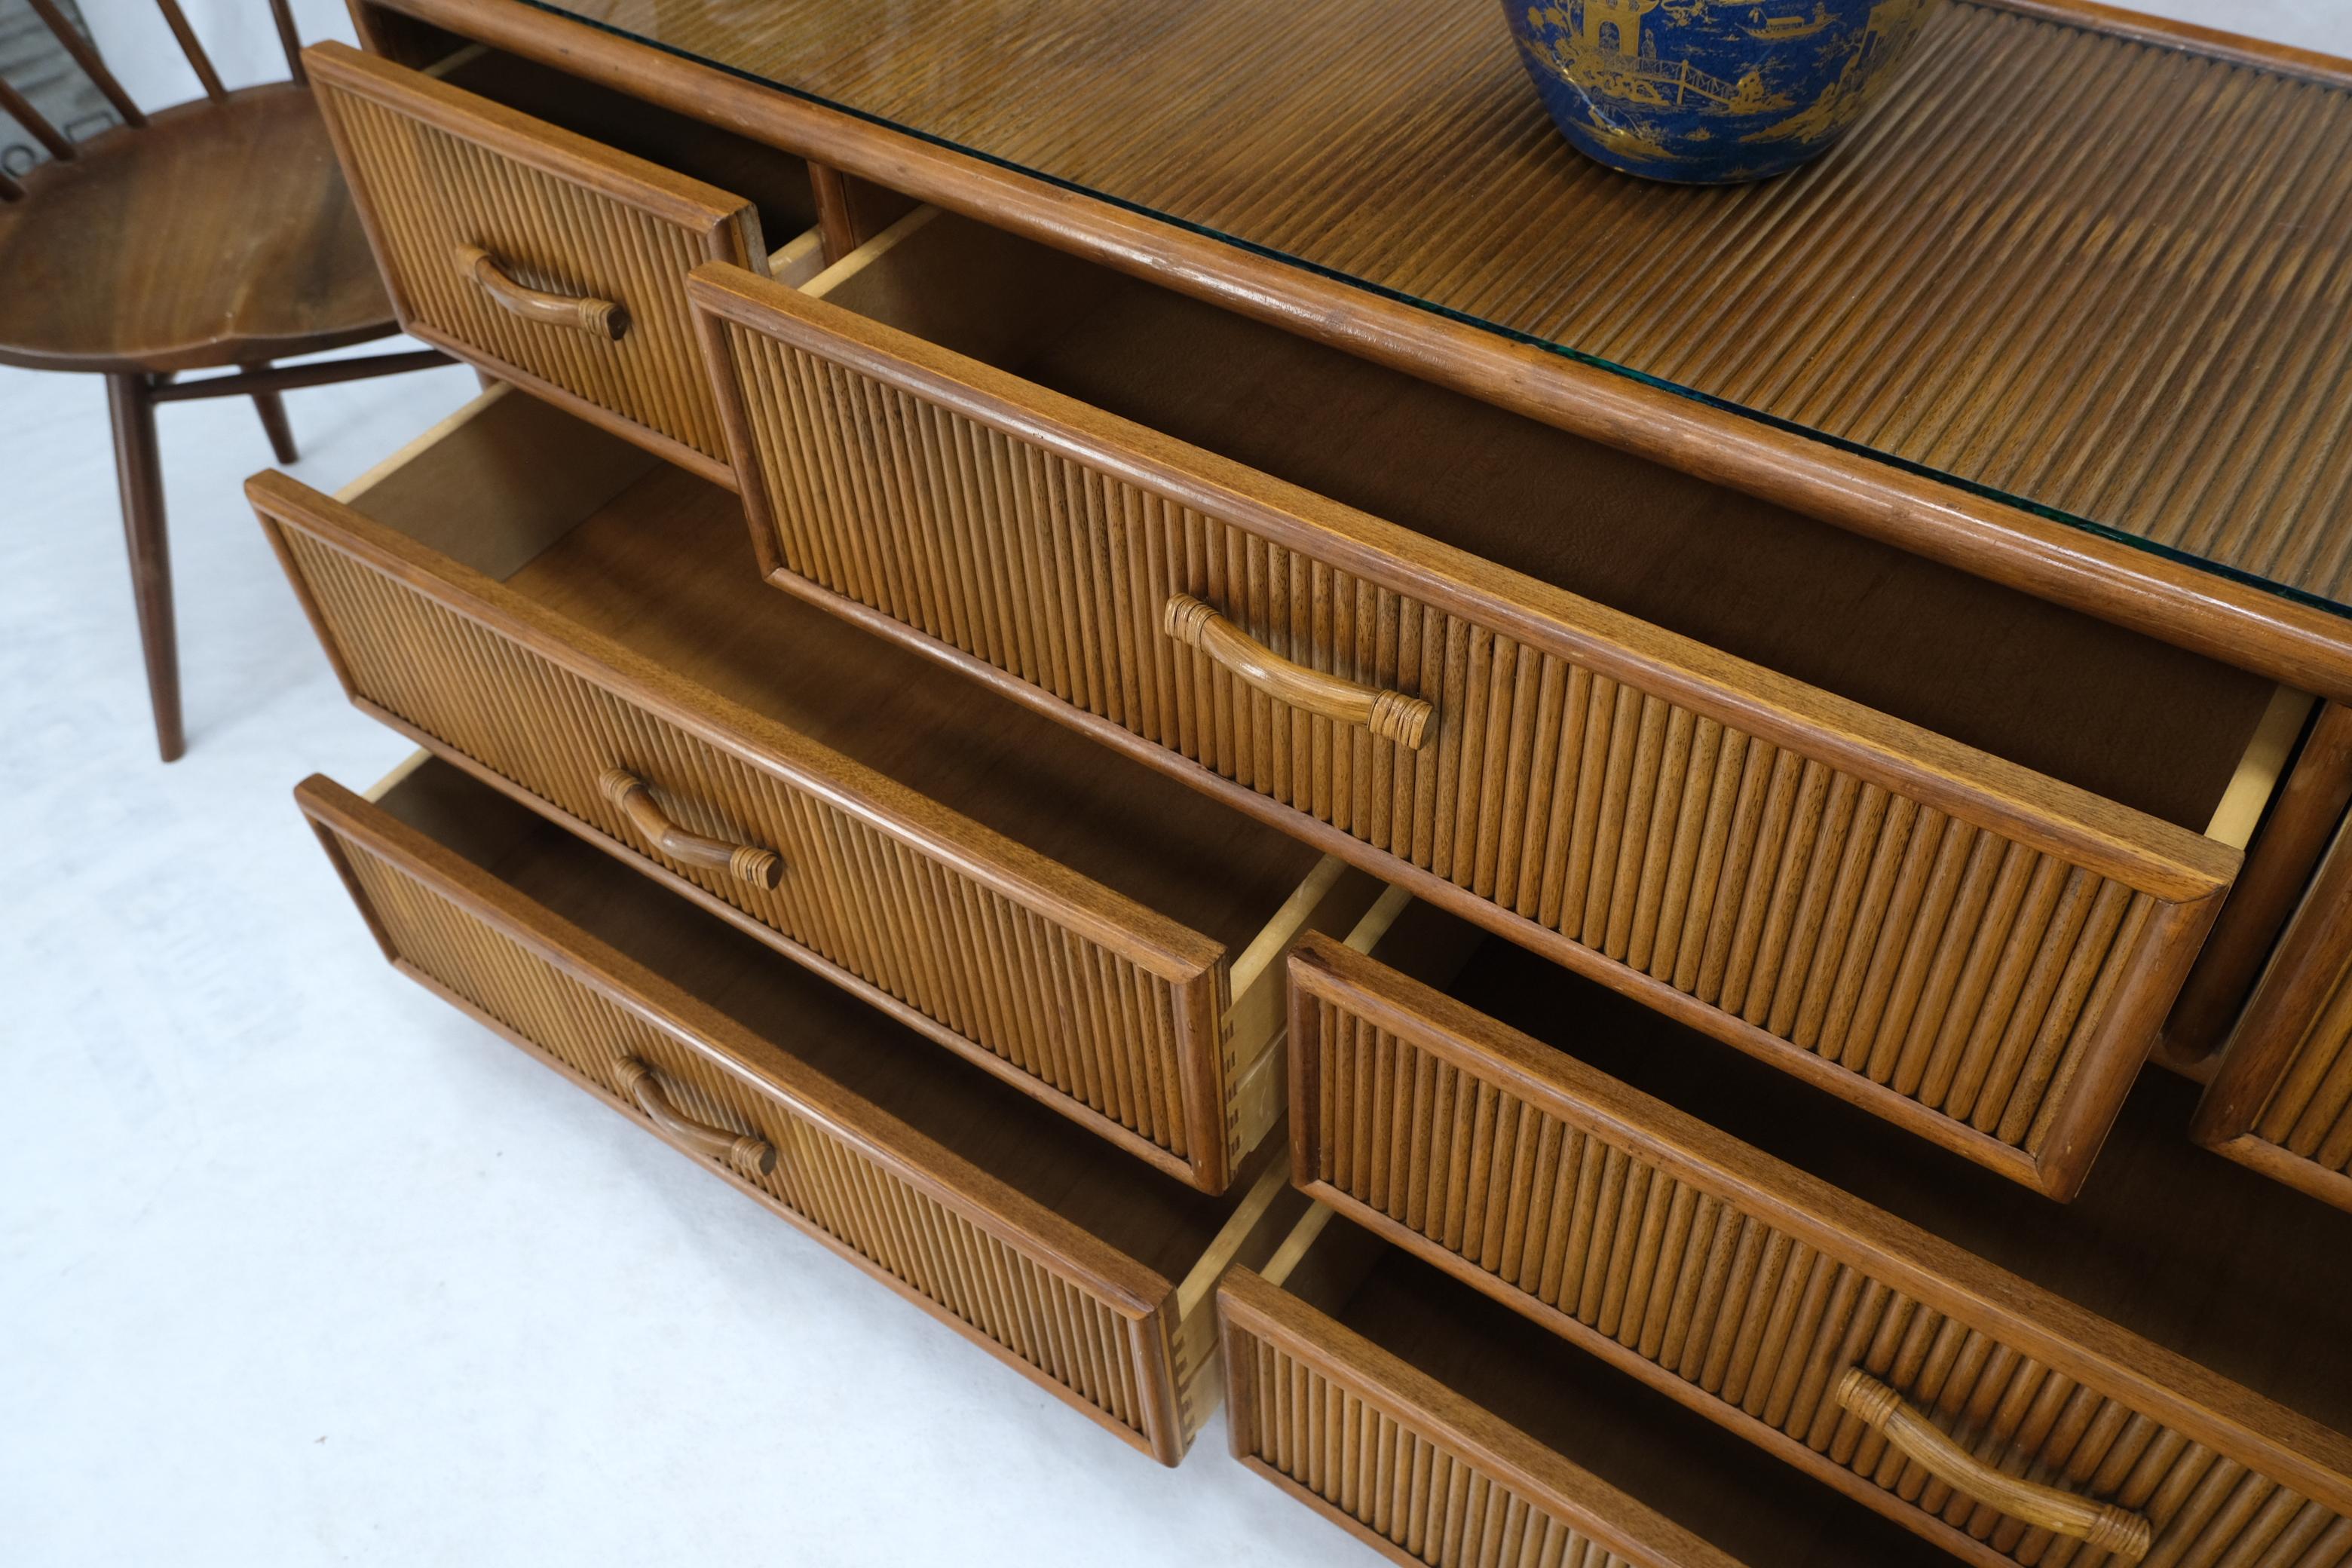 Unknown Seven Drawers Pencil Reed Bamboo Rattan Style Long Dresser w/ Glass Top